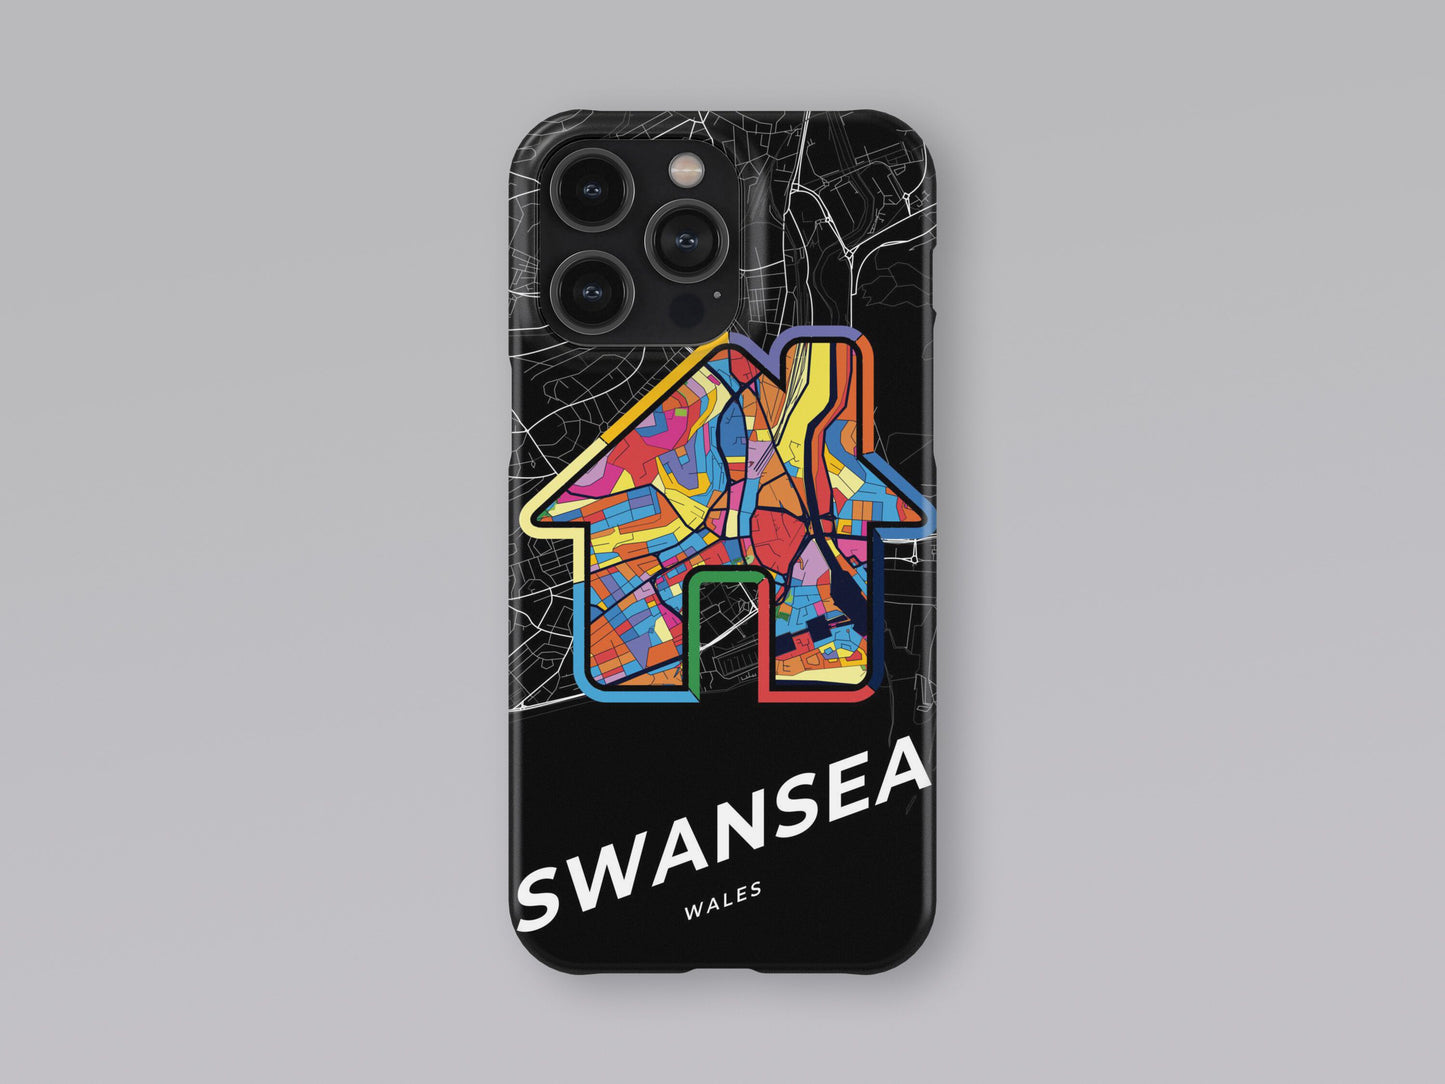 Swansea Wales slim phone case with colorful icon 3